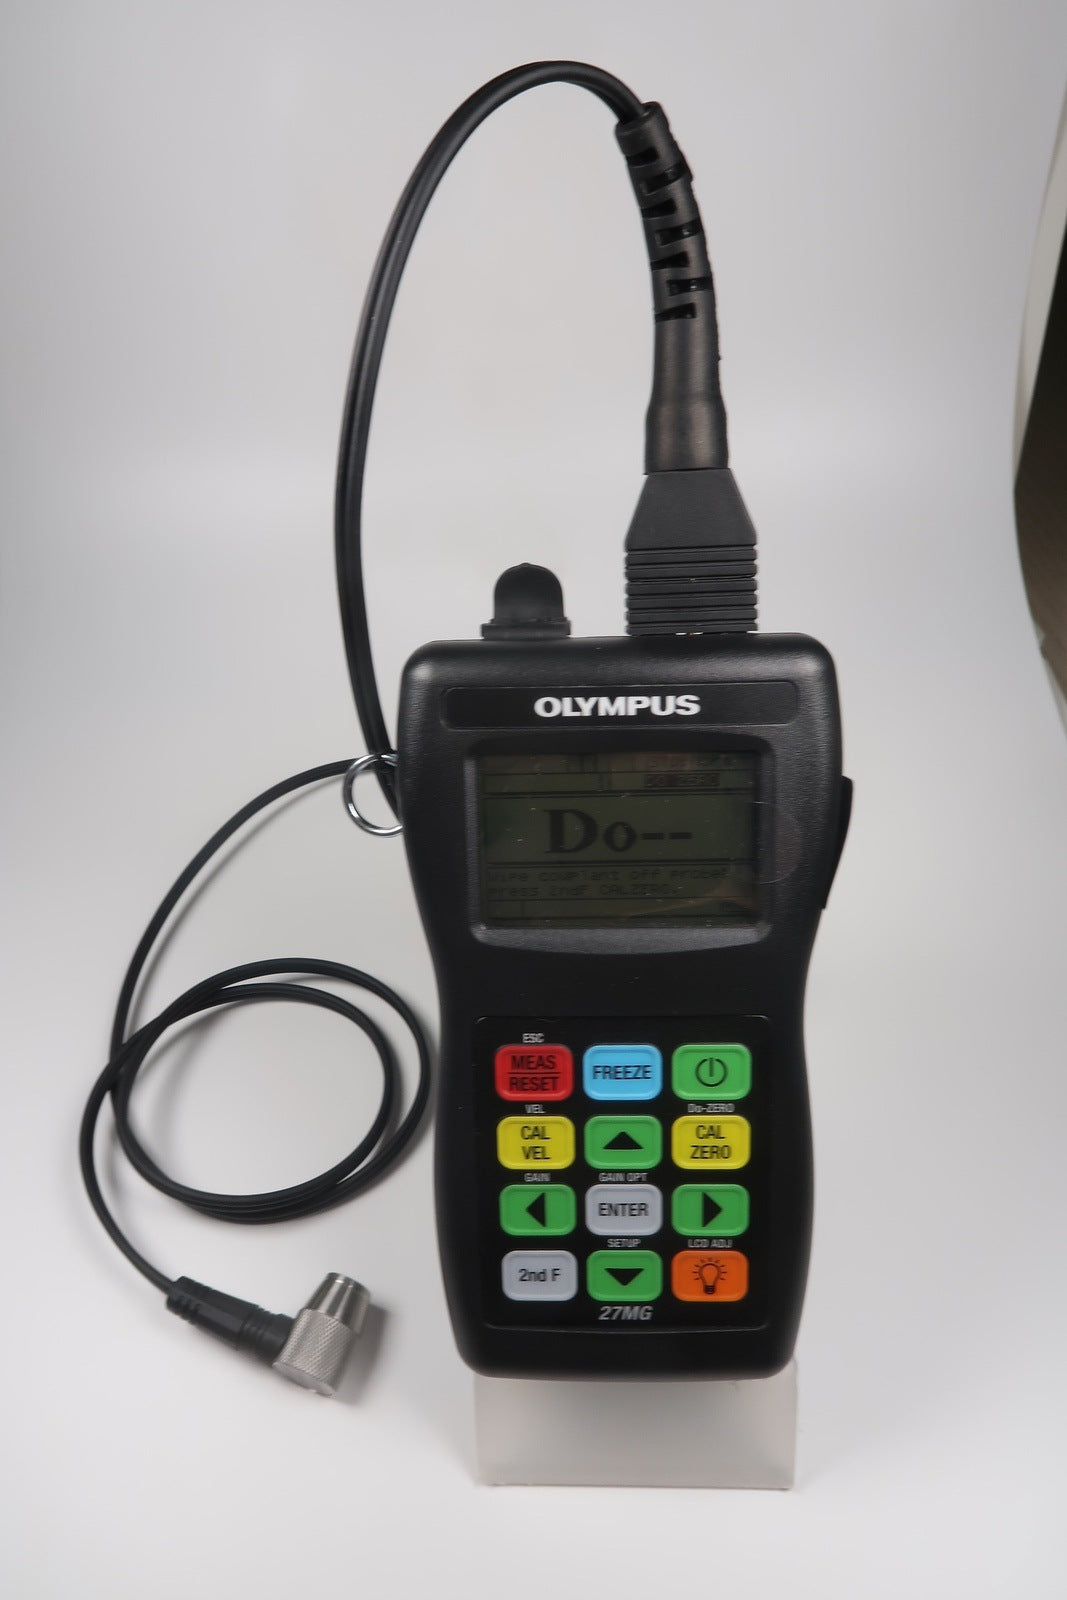 D799 Transducer Ultrasonic thickness probe compatible with Olympus